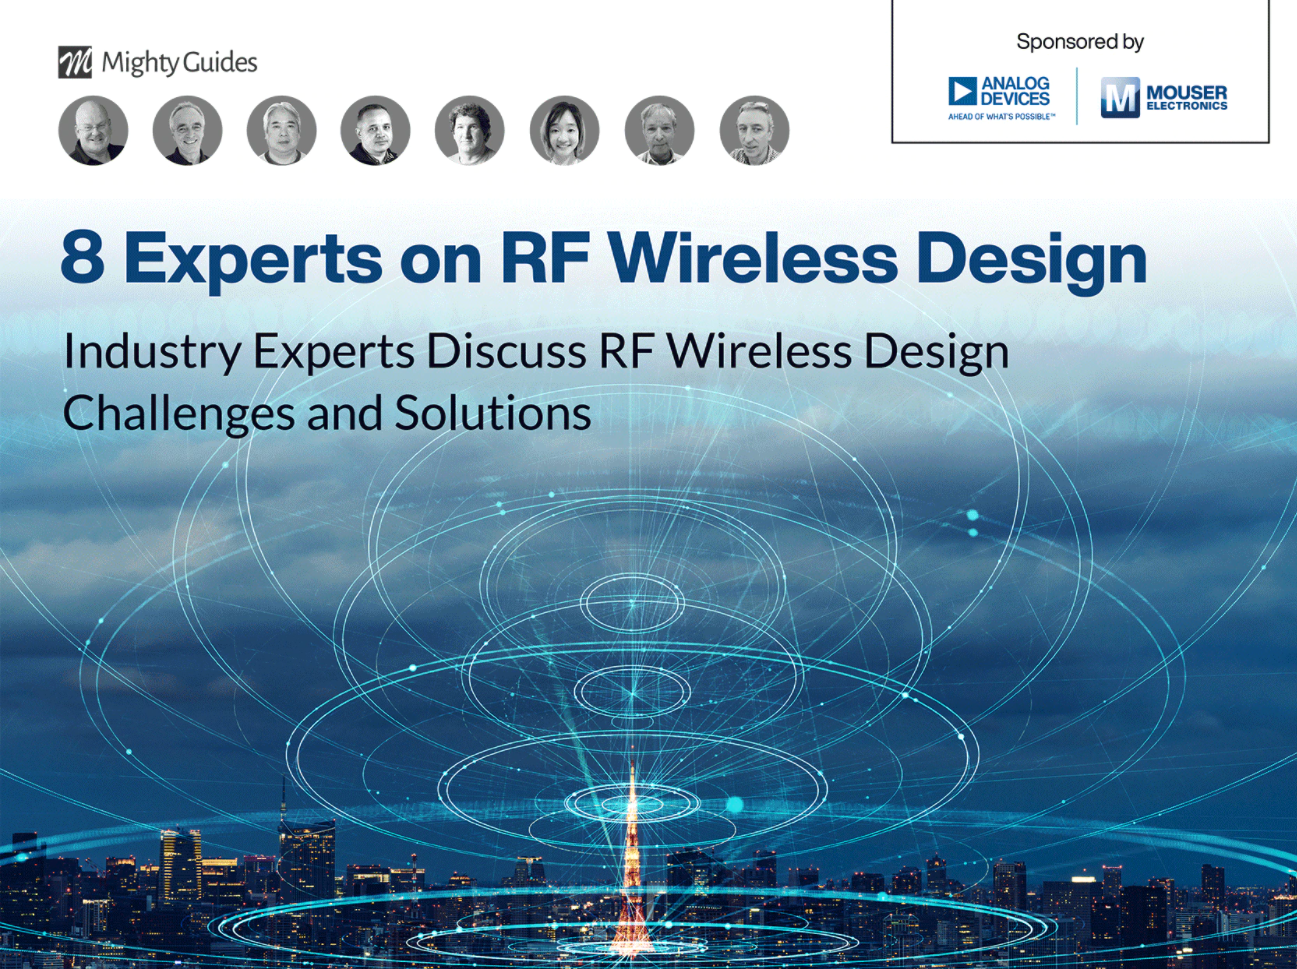 Analog Devices and Mouser Electronics: 8 Experts on RF Wireless Design